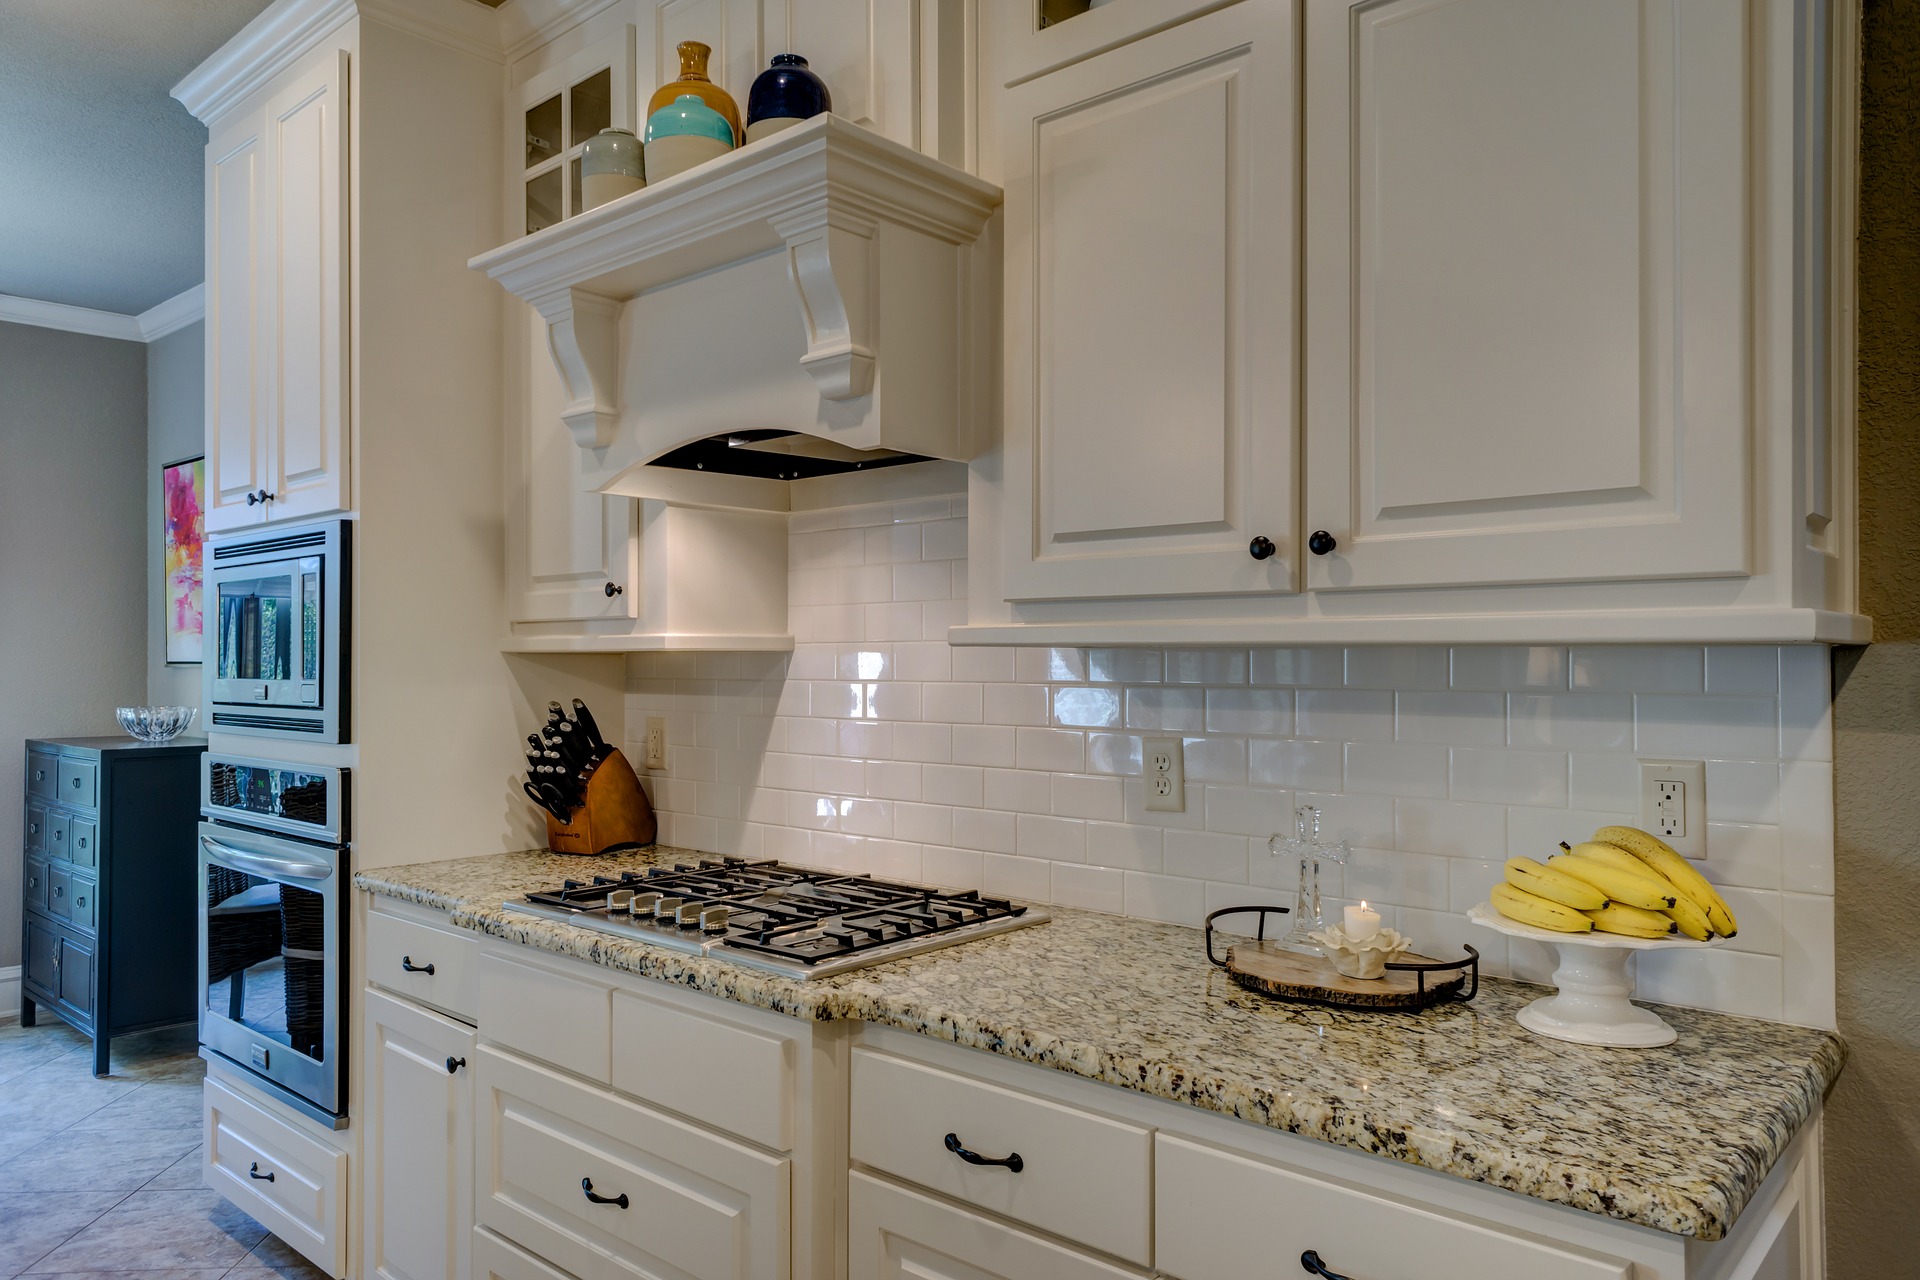 A kitchen with white cabinets and granite counter tops, understanding cabinet refacing.